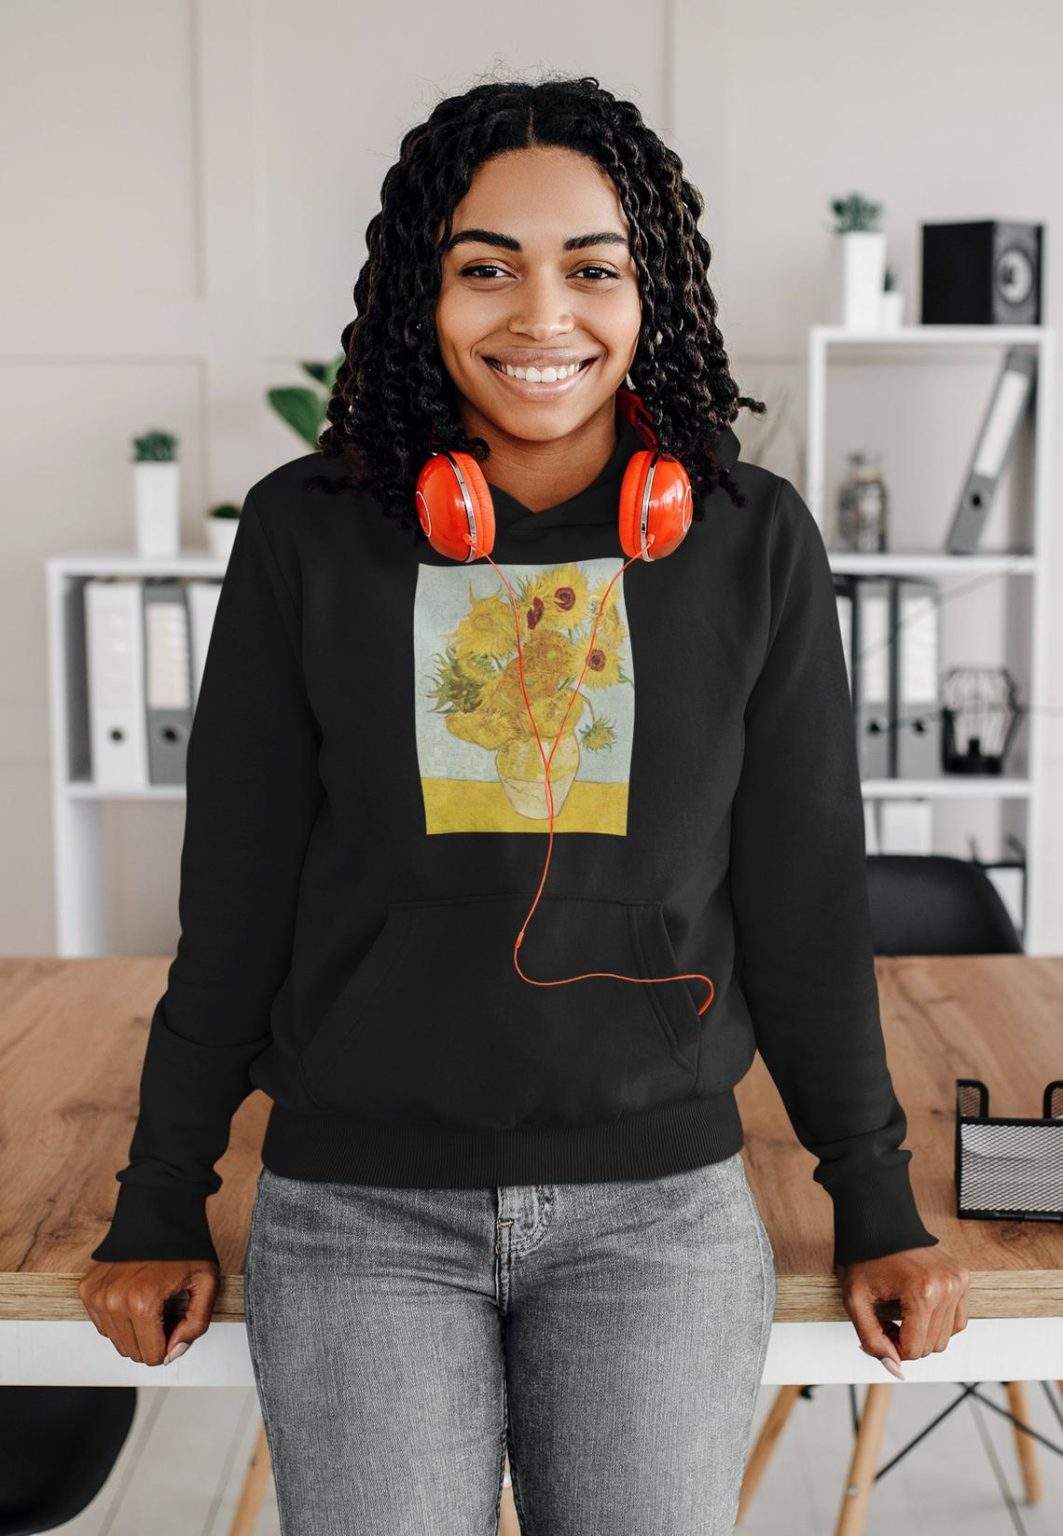 Women's Hoodie Sunflower Vase - ToroModa  https://www.toromoda.com/products/womens-hoodie-sunflower-vase-1  The hoodie have light cotton wool on the inside.The hoodie are extremely soft and provide maximum comfort and warmth during winter days.They are made of 100%.